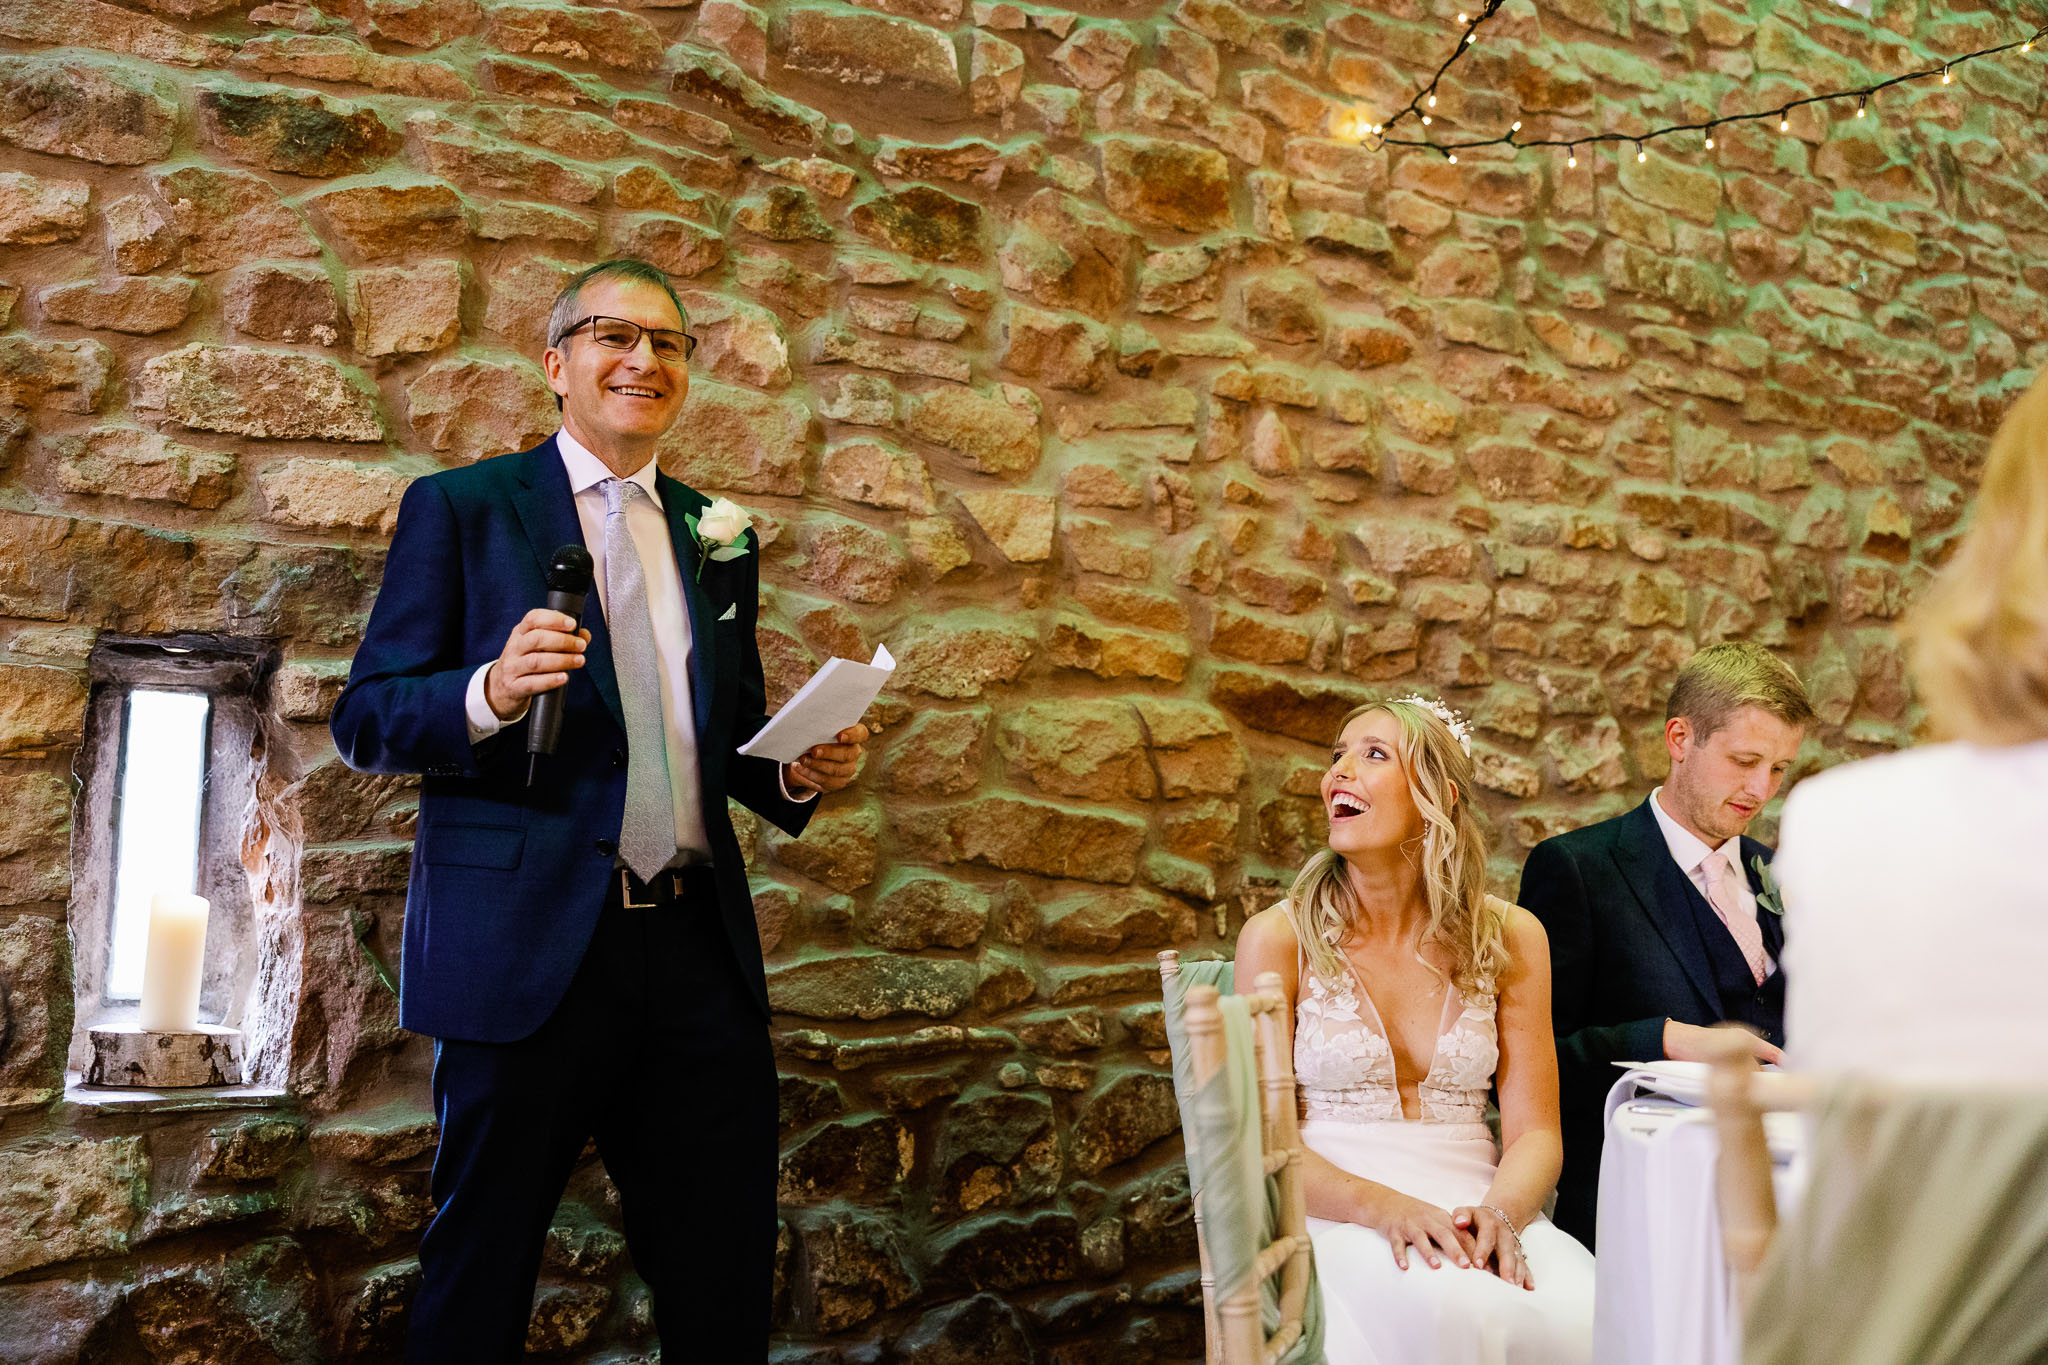 WQedding Speeches by the father of the bride